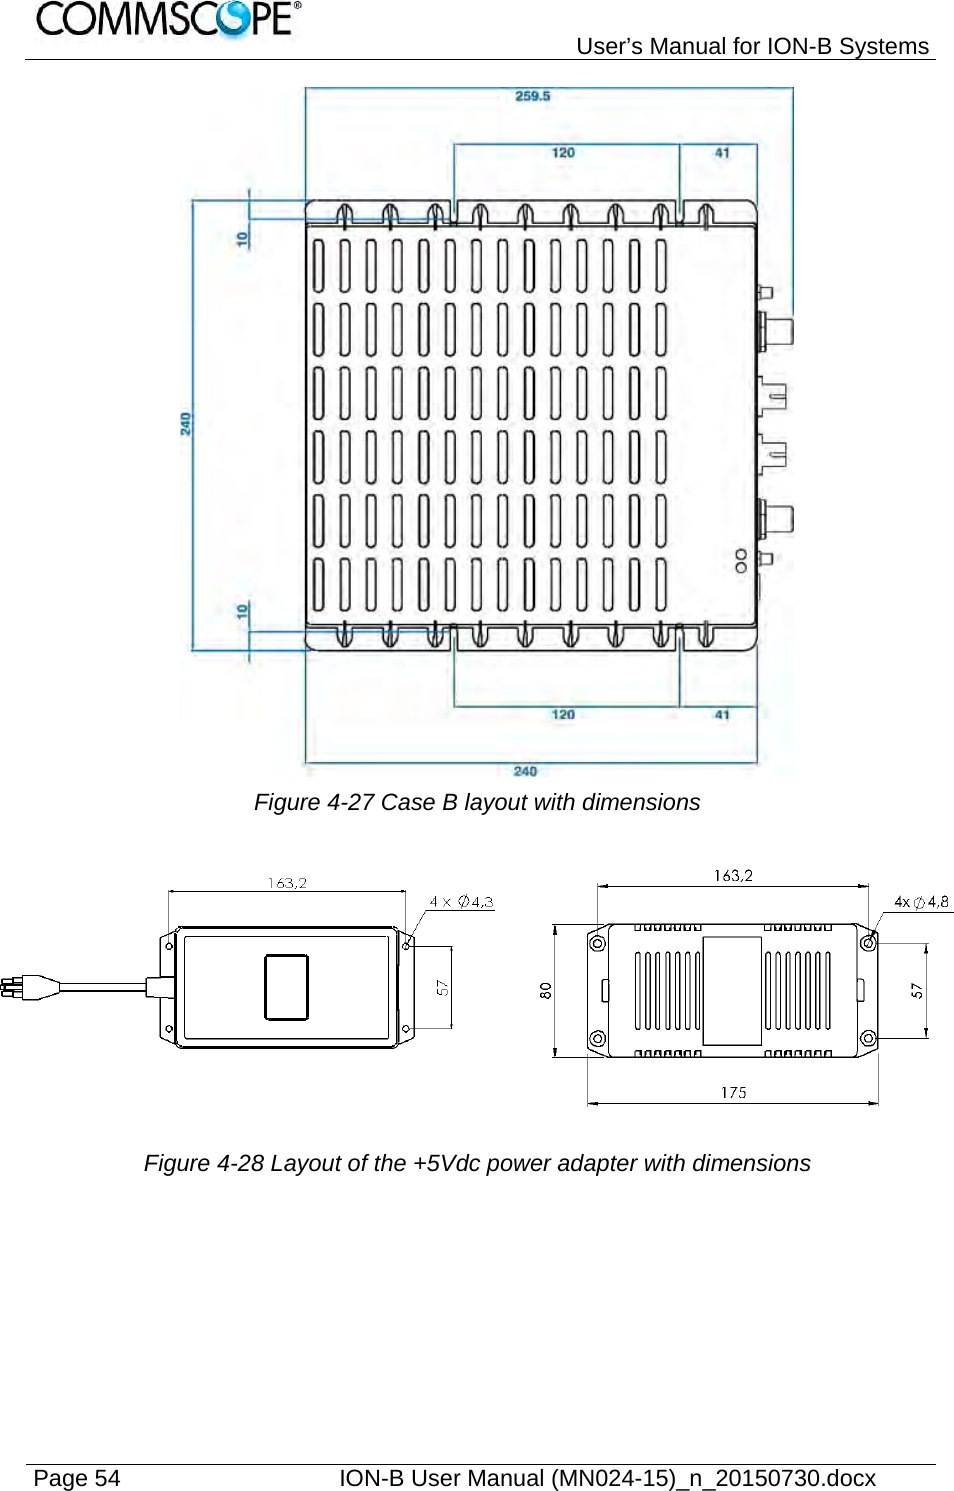   User’s Manual for ION-B Systems Page 54    ION-B User Manual (MN024-15)_n_20150730.docx   Figure 4-27 Case B layout with dimensions  Figure 4-28 Layout of the +5Vdc power adapter with dimensions    